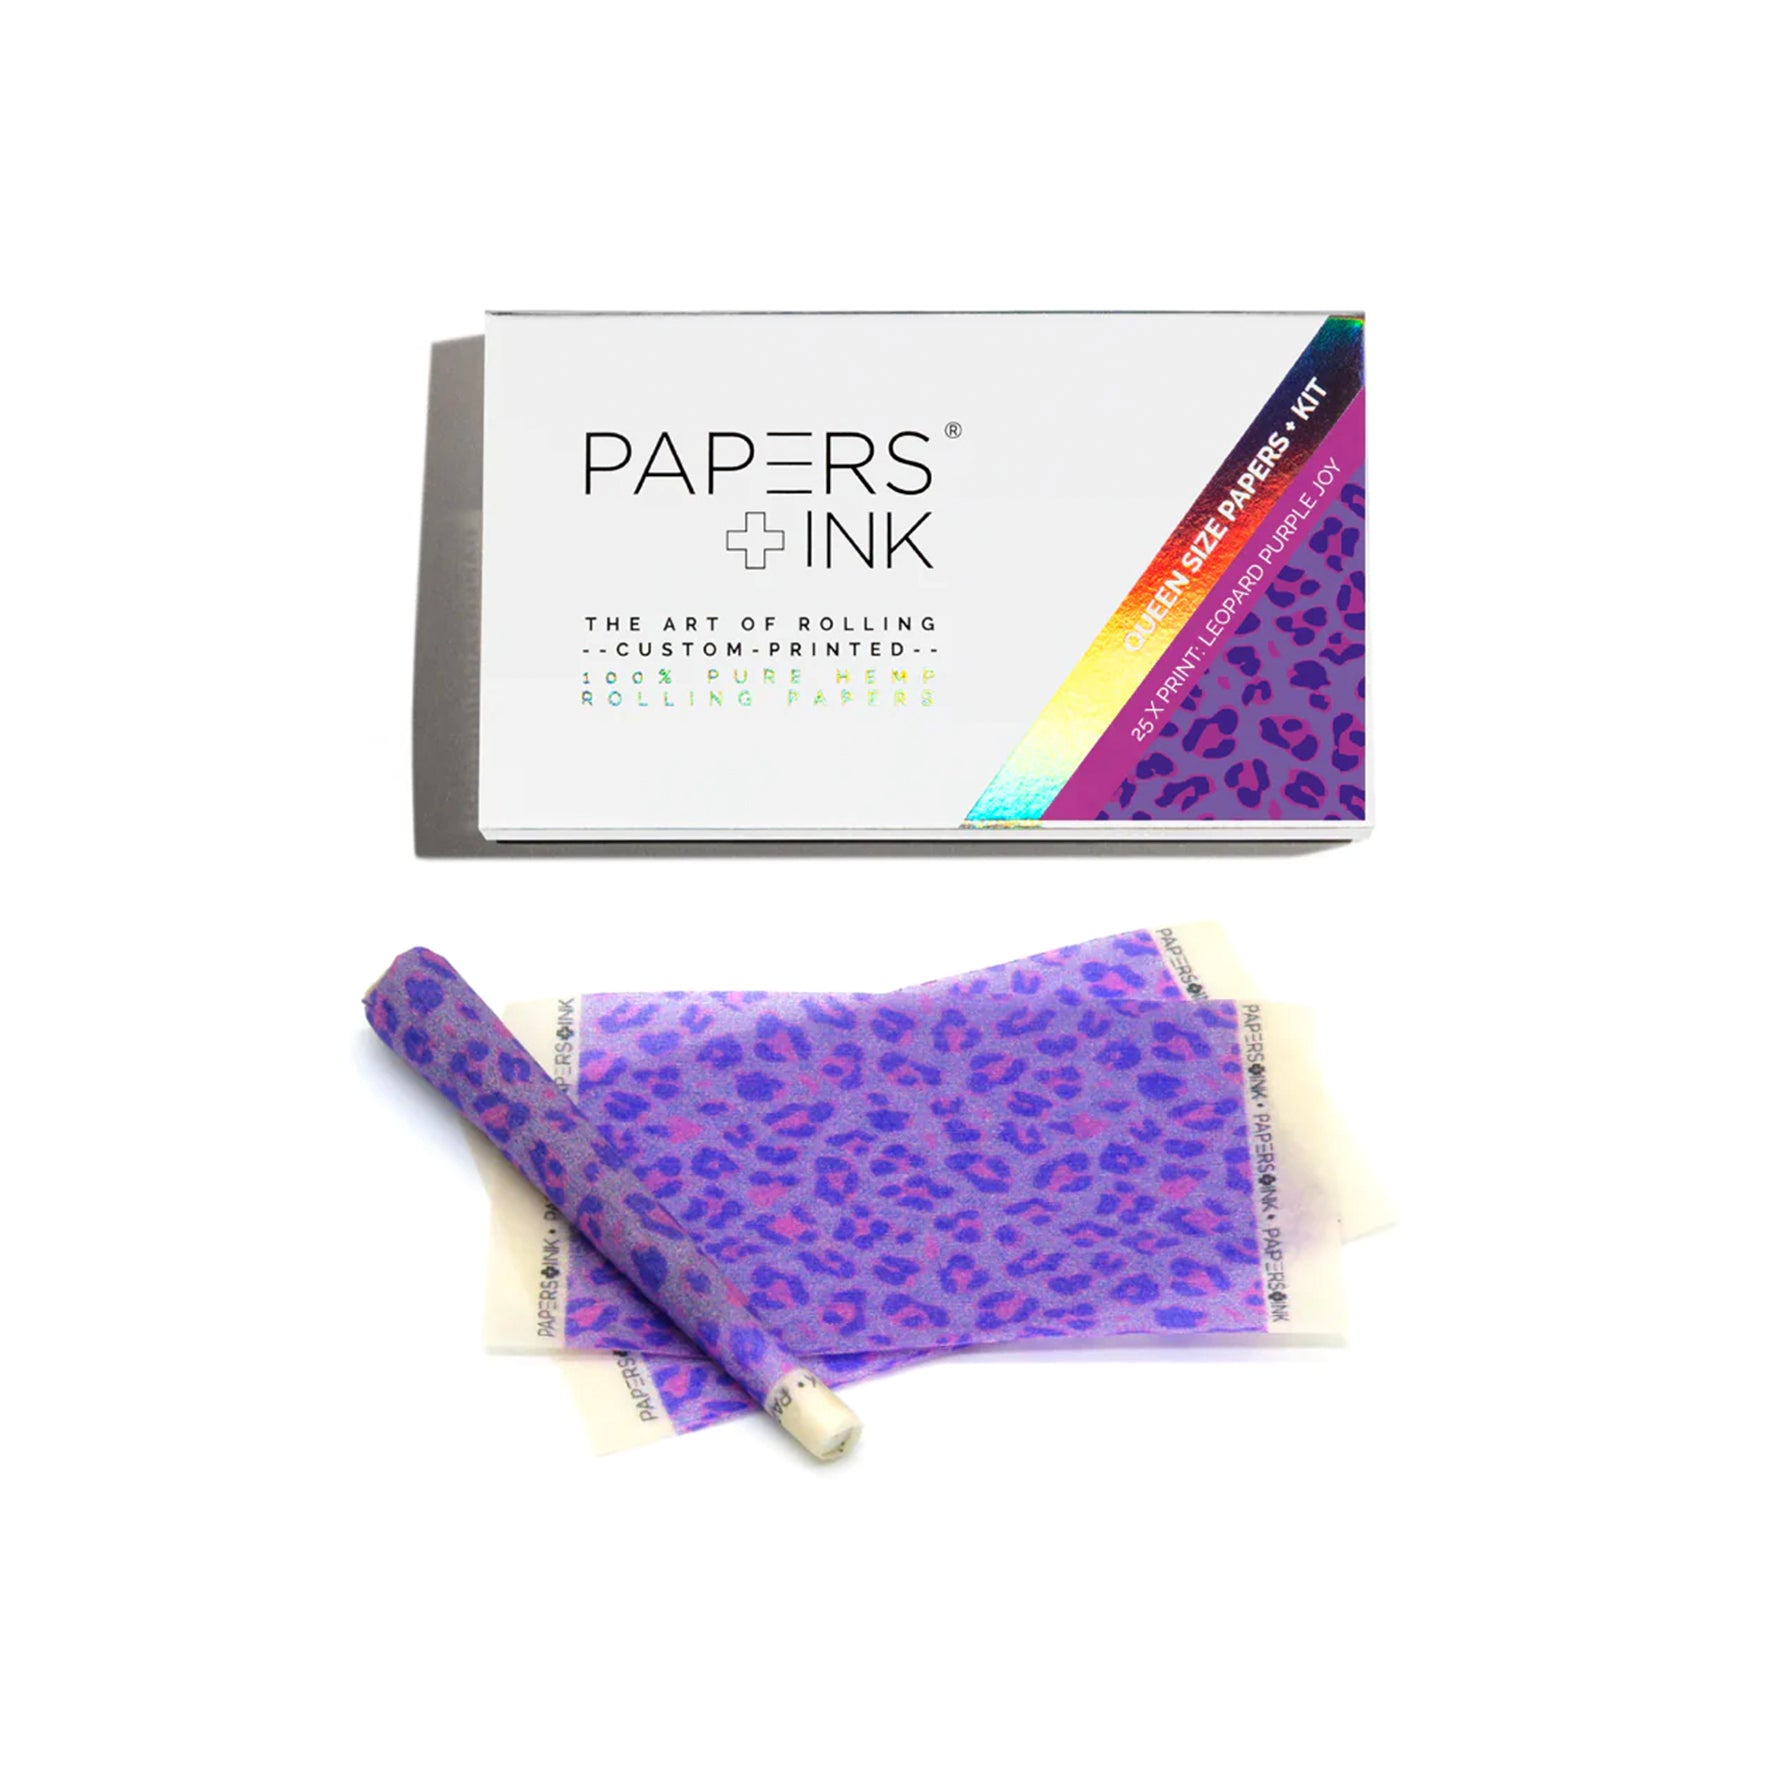 papers&ink, leopard purple joy ,papers, joint papers, rolling papers, colored papers, farbige blättchen, bedruckte blättchen, Kingsize, 1 1/4, papes, papers, OCB, Purize, Gizeh